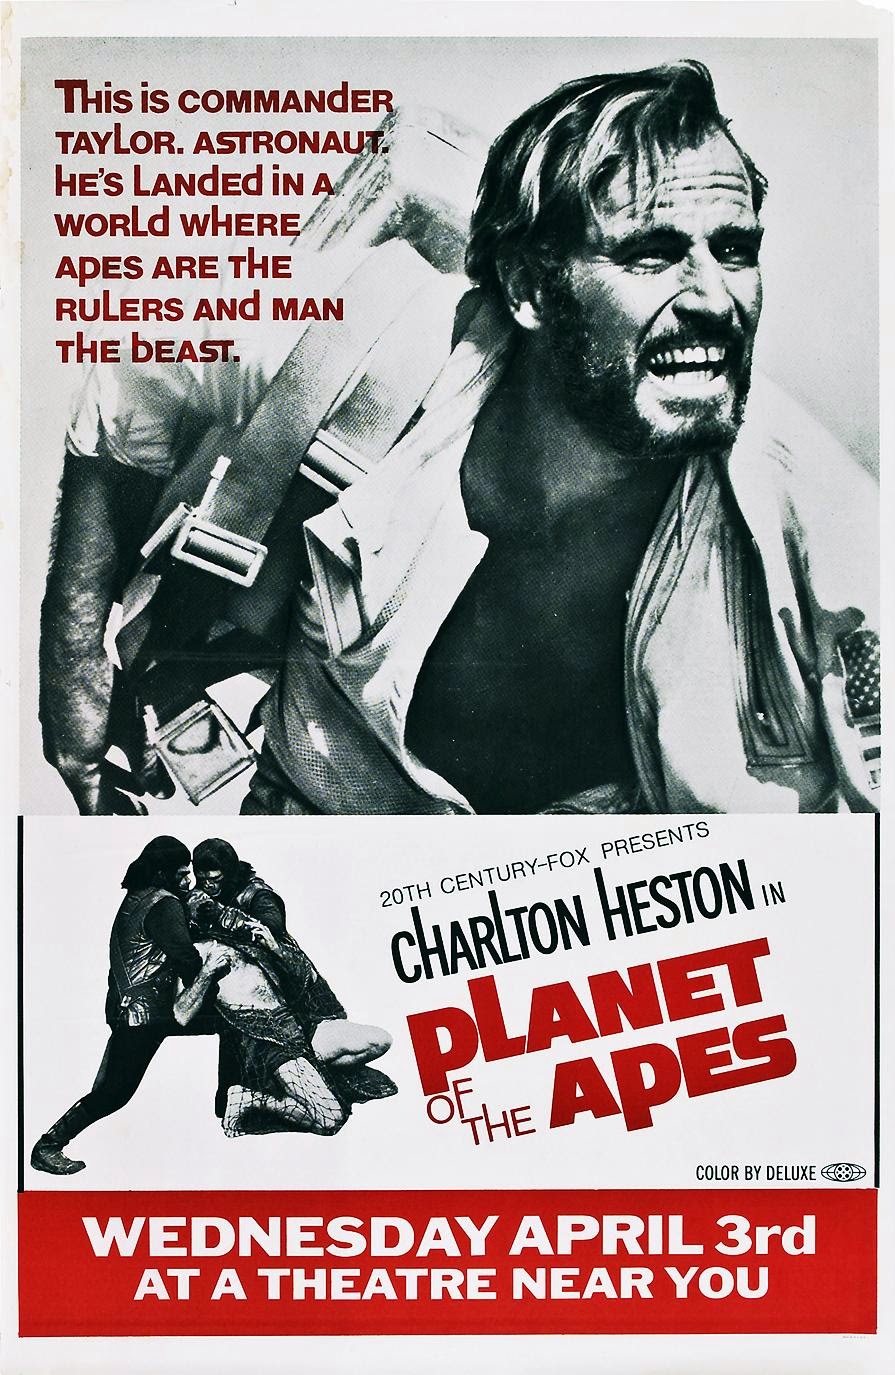 Archives Of The Apes International Movie Posters Part 9